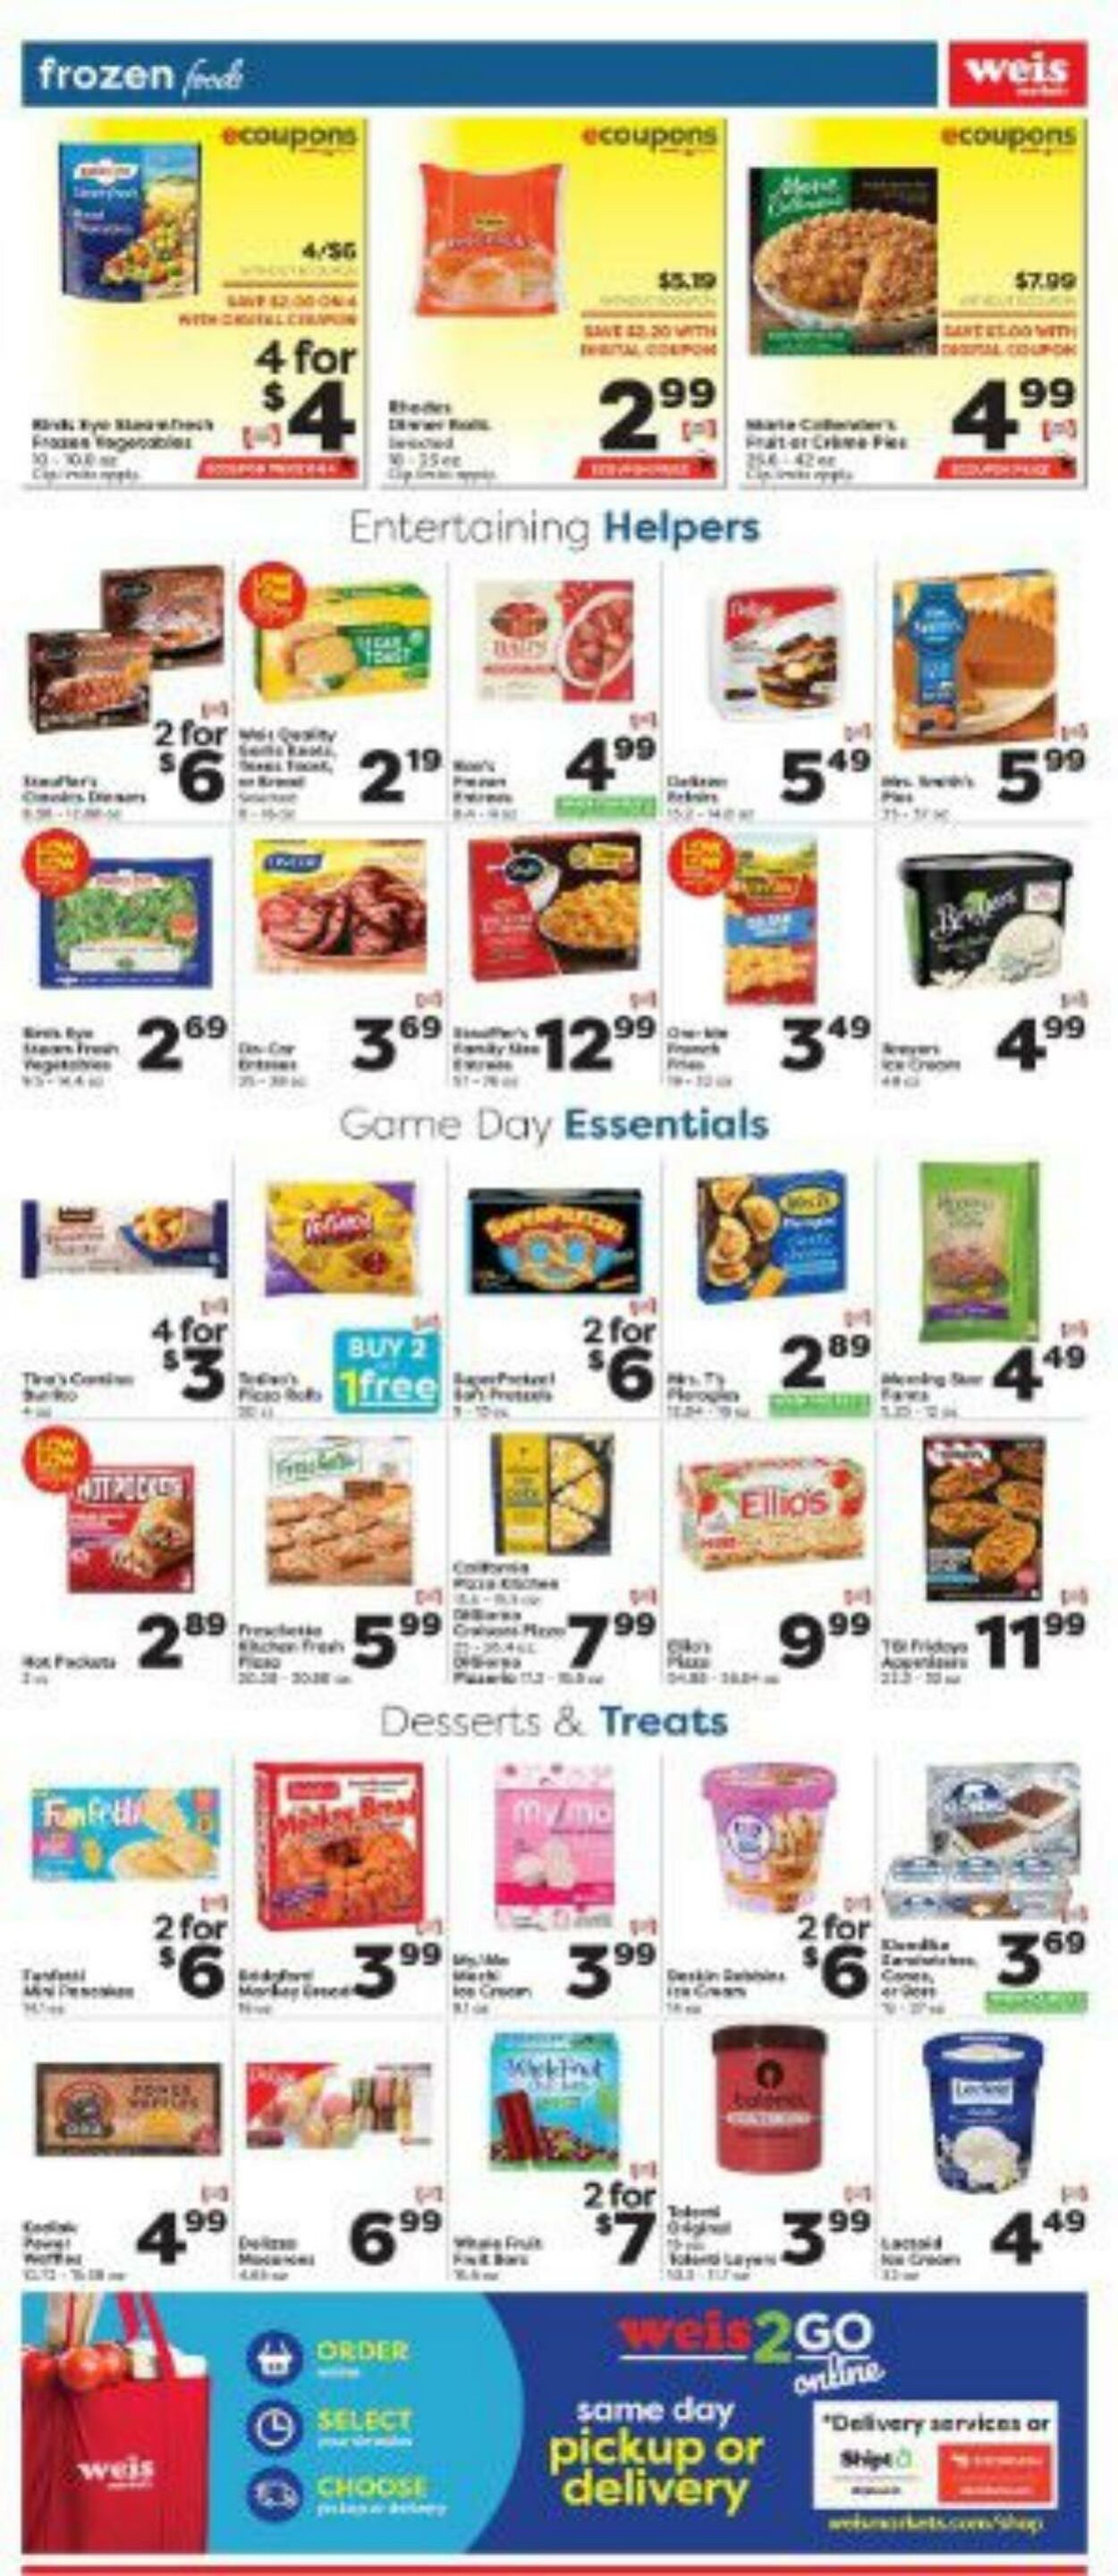 Weekly ad Weis 11/03/2022 - 11/30/2022